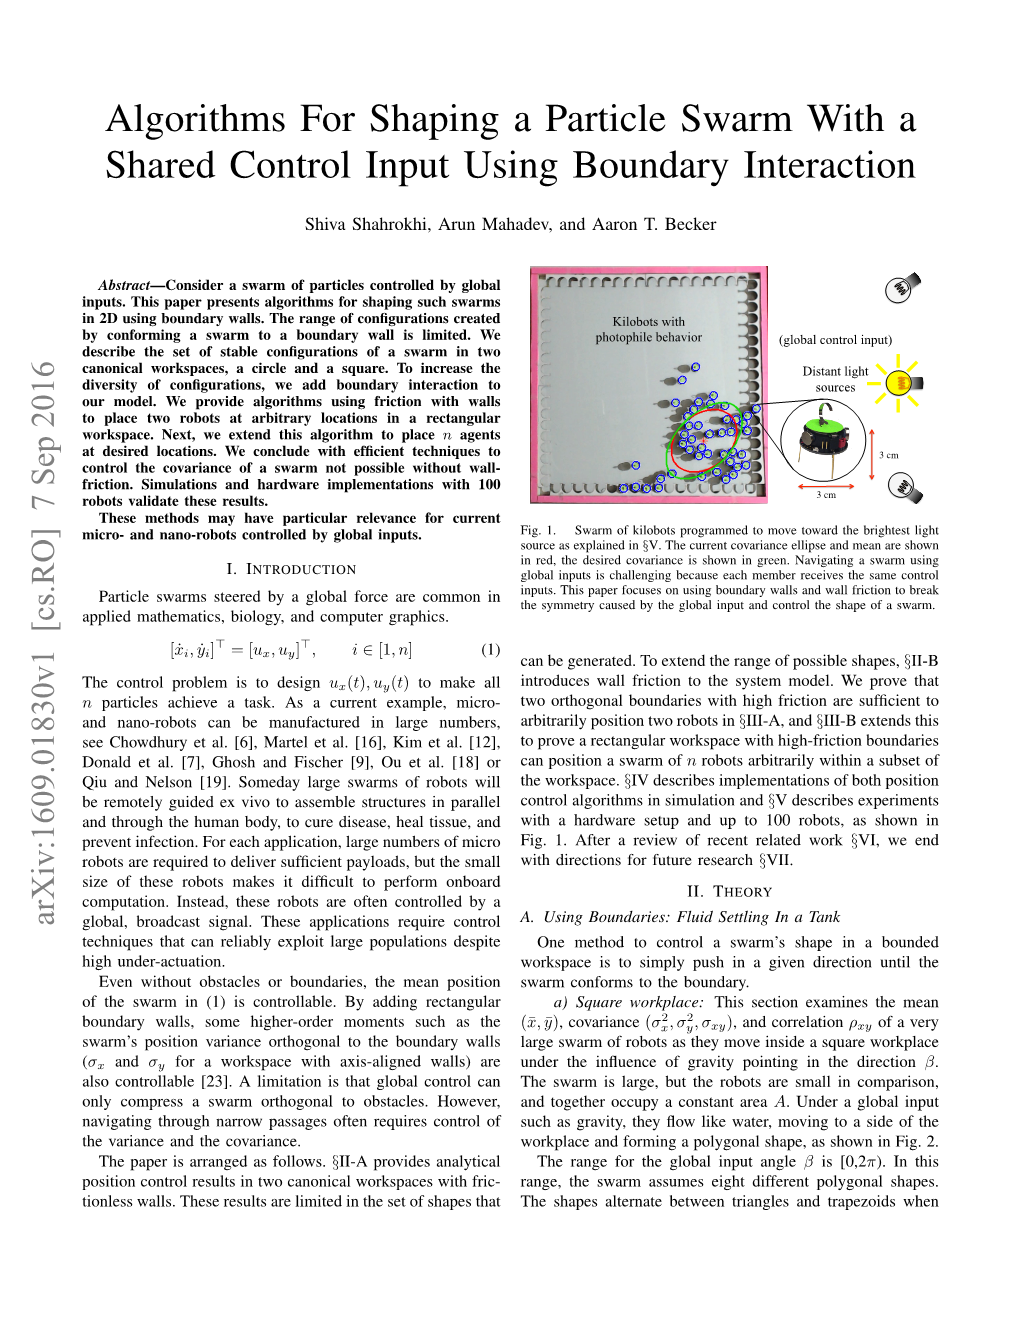 Algorithms for Shaping a Particle Swarm with a Shared Control Input Using Boundary Interaction